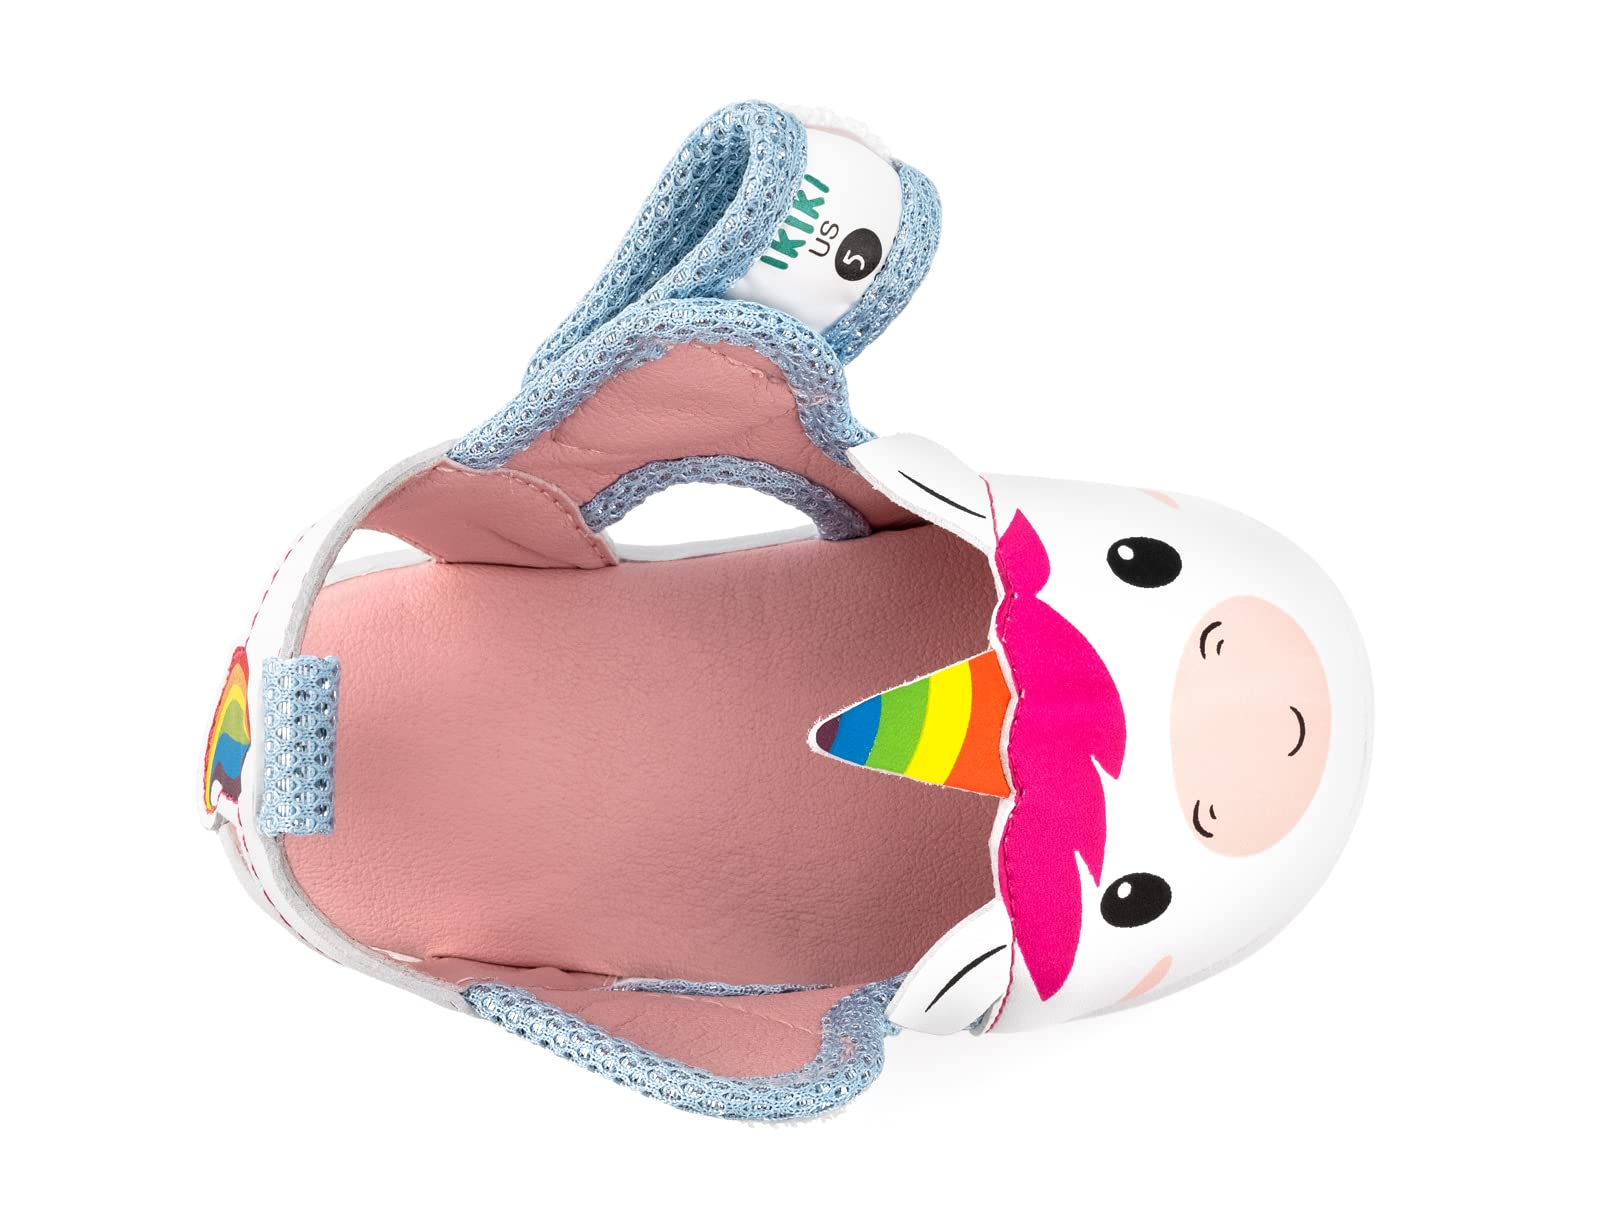 ikiki Squeaky Sandals for Kids with On/Off Squeaker Switch